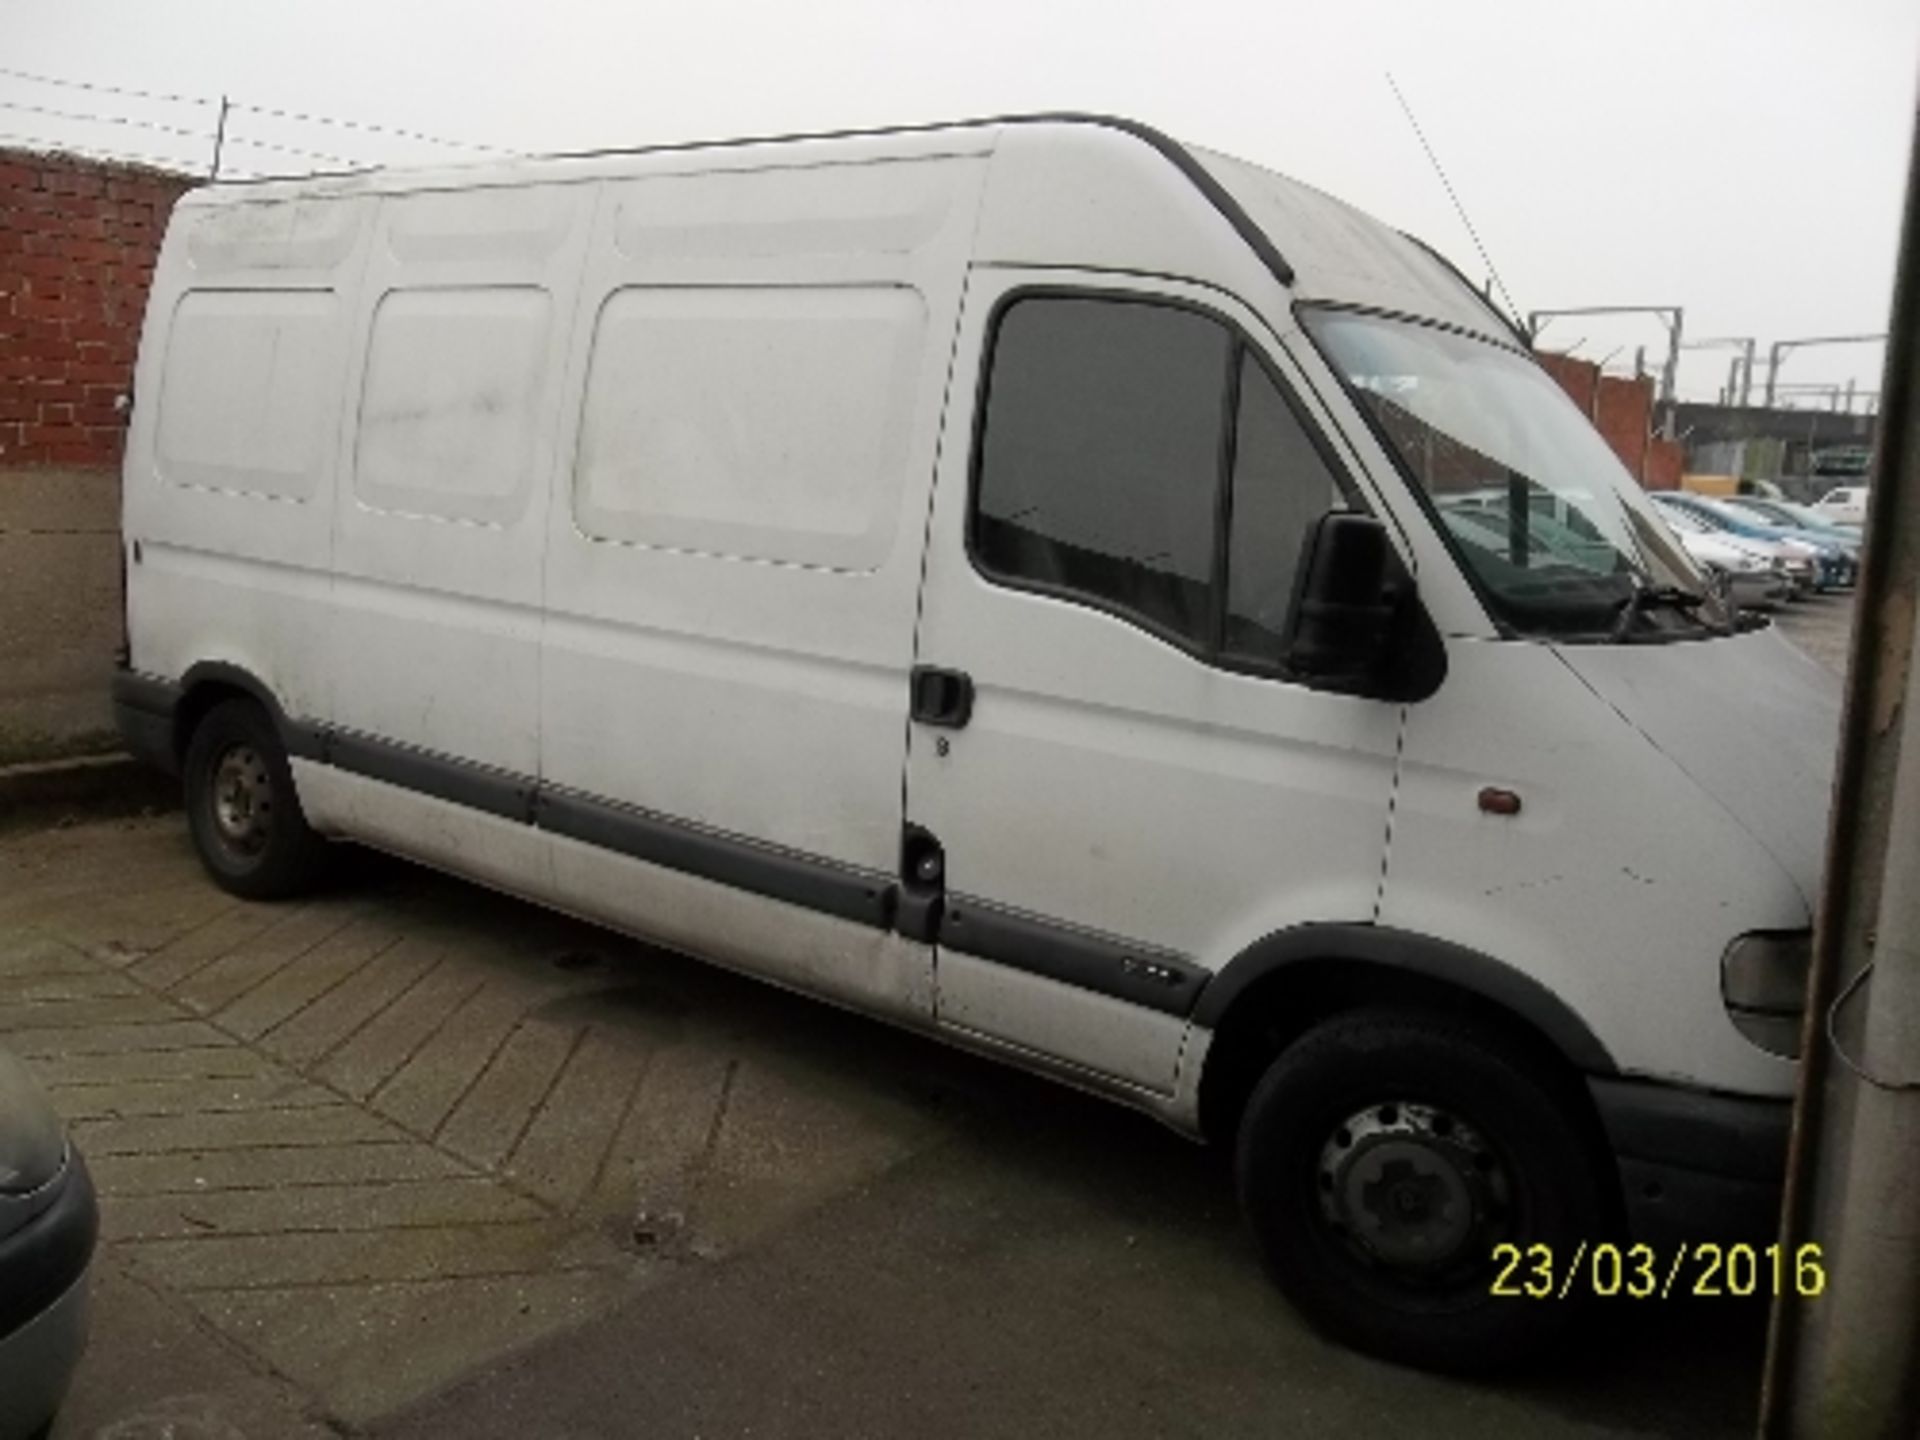 Vauxhall Movano DTI 3500 LWB - NU03 YZK Date of registration: 22.05.2003 2187cc, diesel, manual, - Image 2 of 4